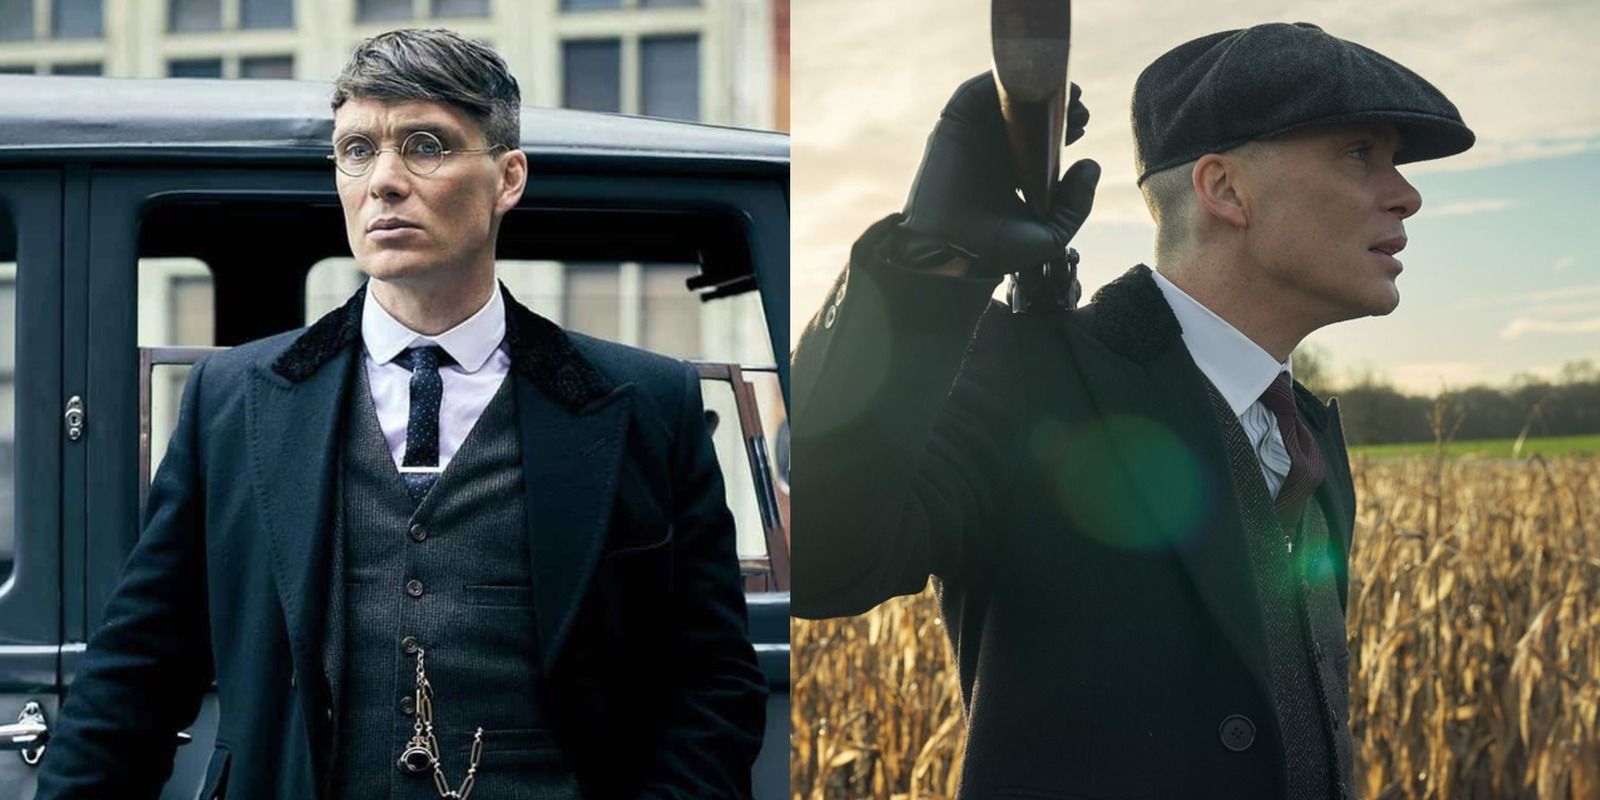 Splt image of Tommy Shelby walking and holding a gun in a field in Peaky Blinders